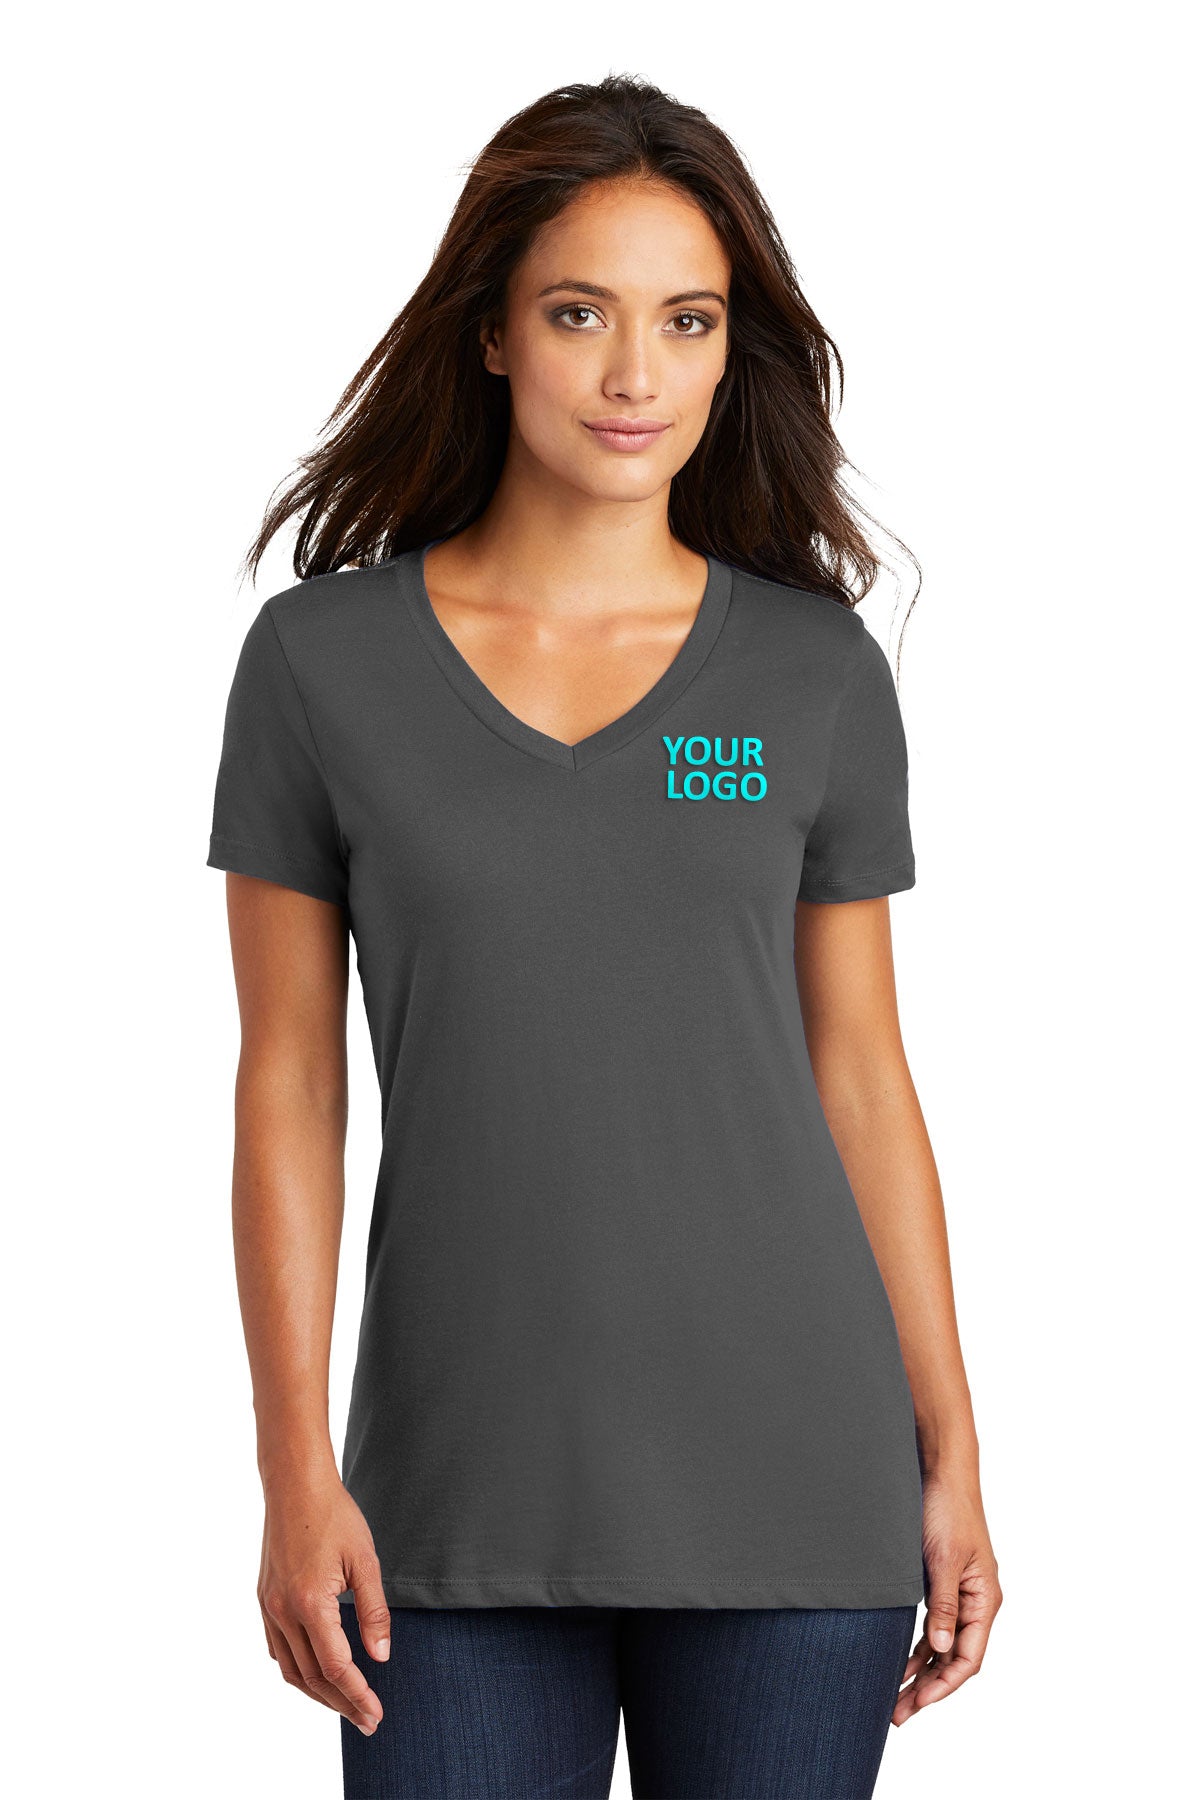 District Made Ladies Perfect Weight V-Neck Tee's, Charcoal